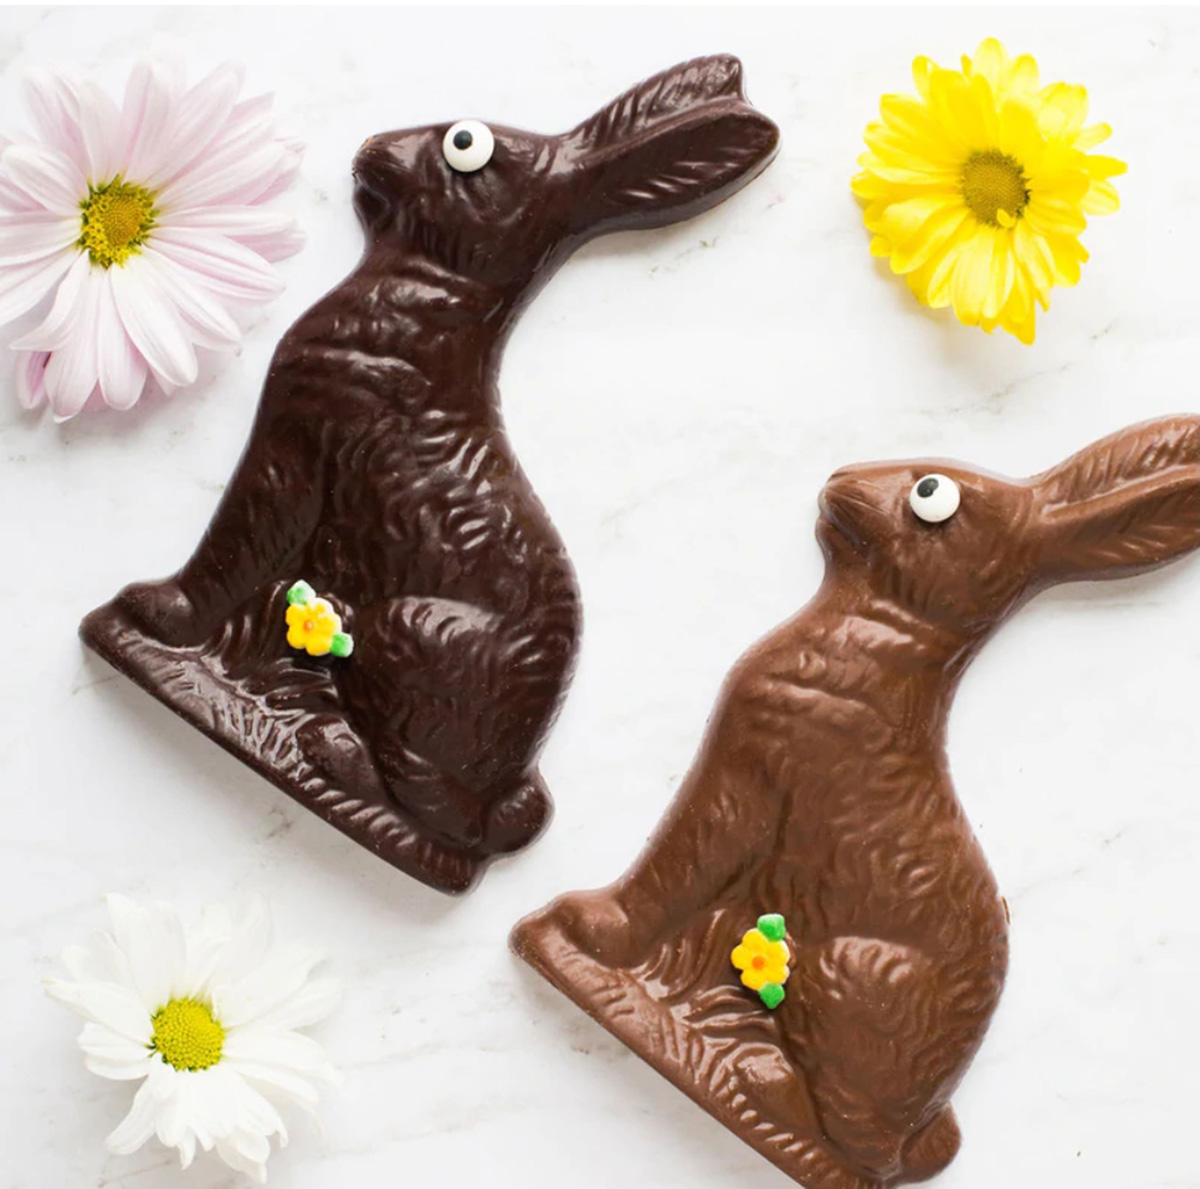 31 Best Easter Toys & Easter Basket Gifts For Kids This Spring